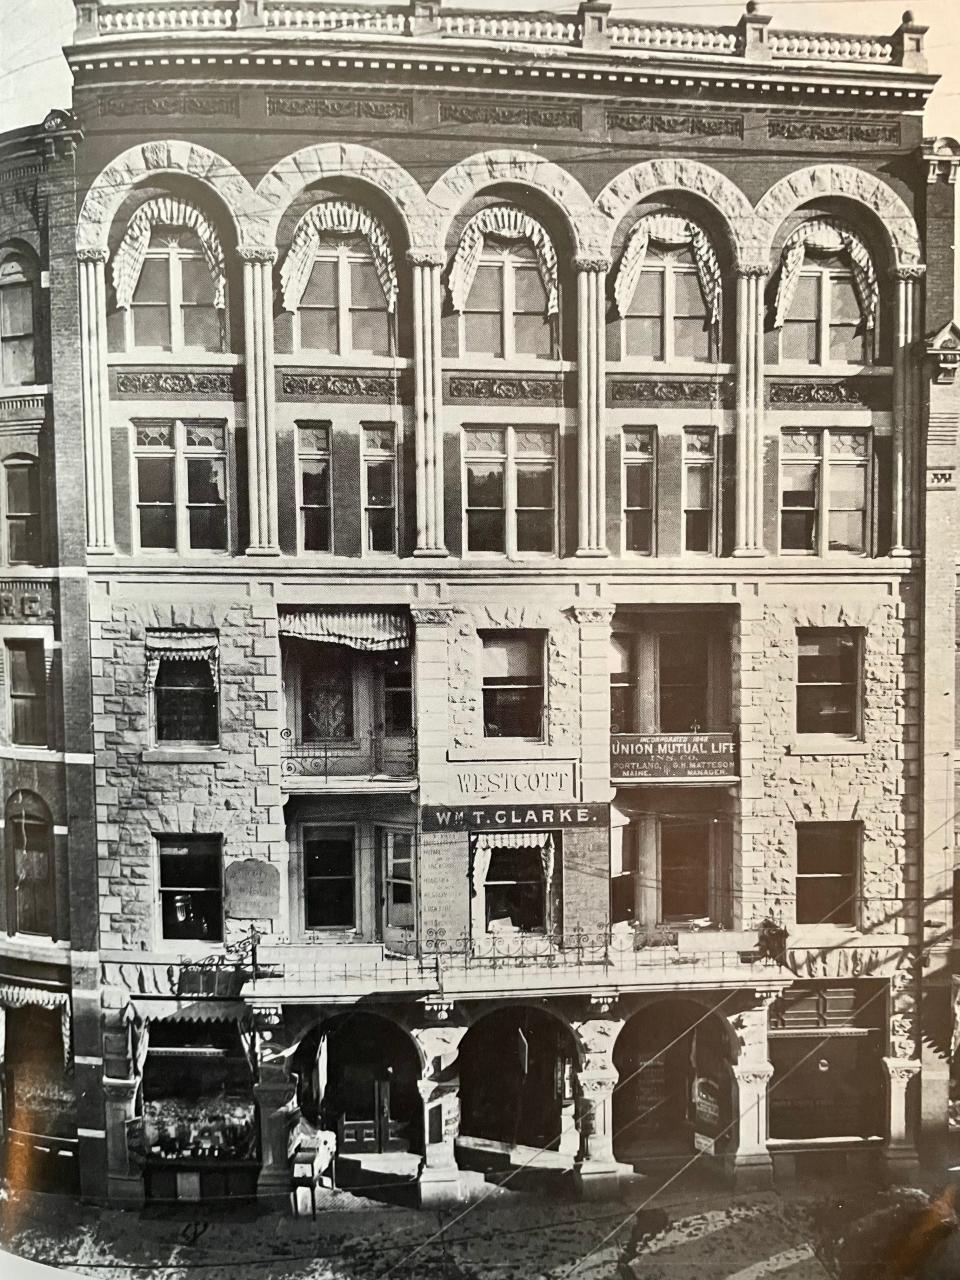 The Harvey Westcott building on State Street, about 1920.